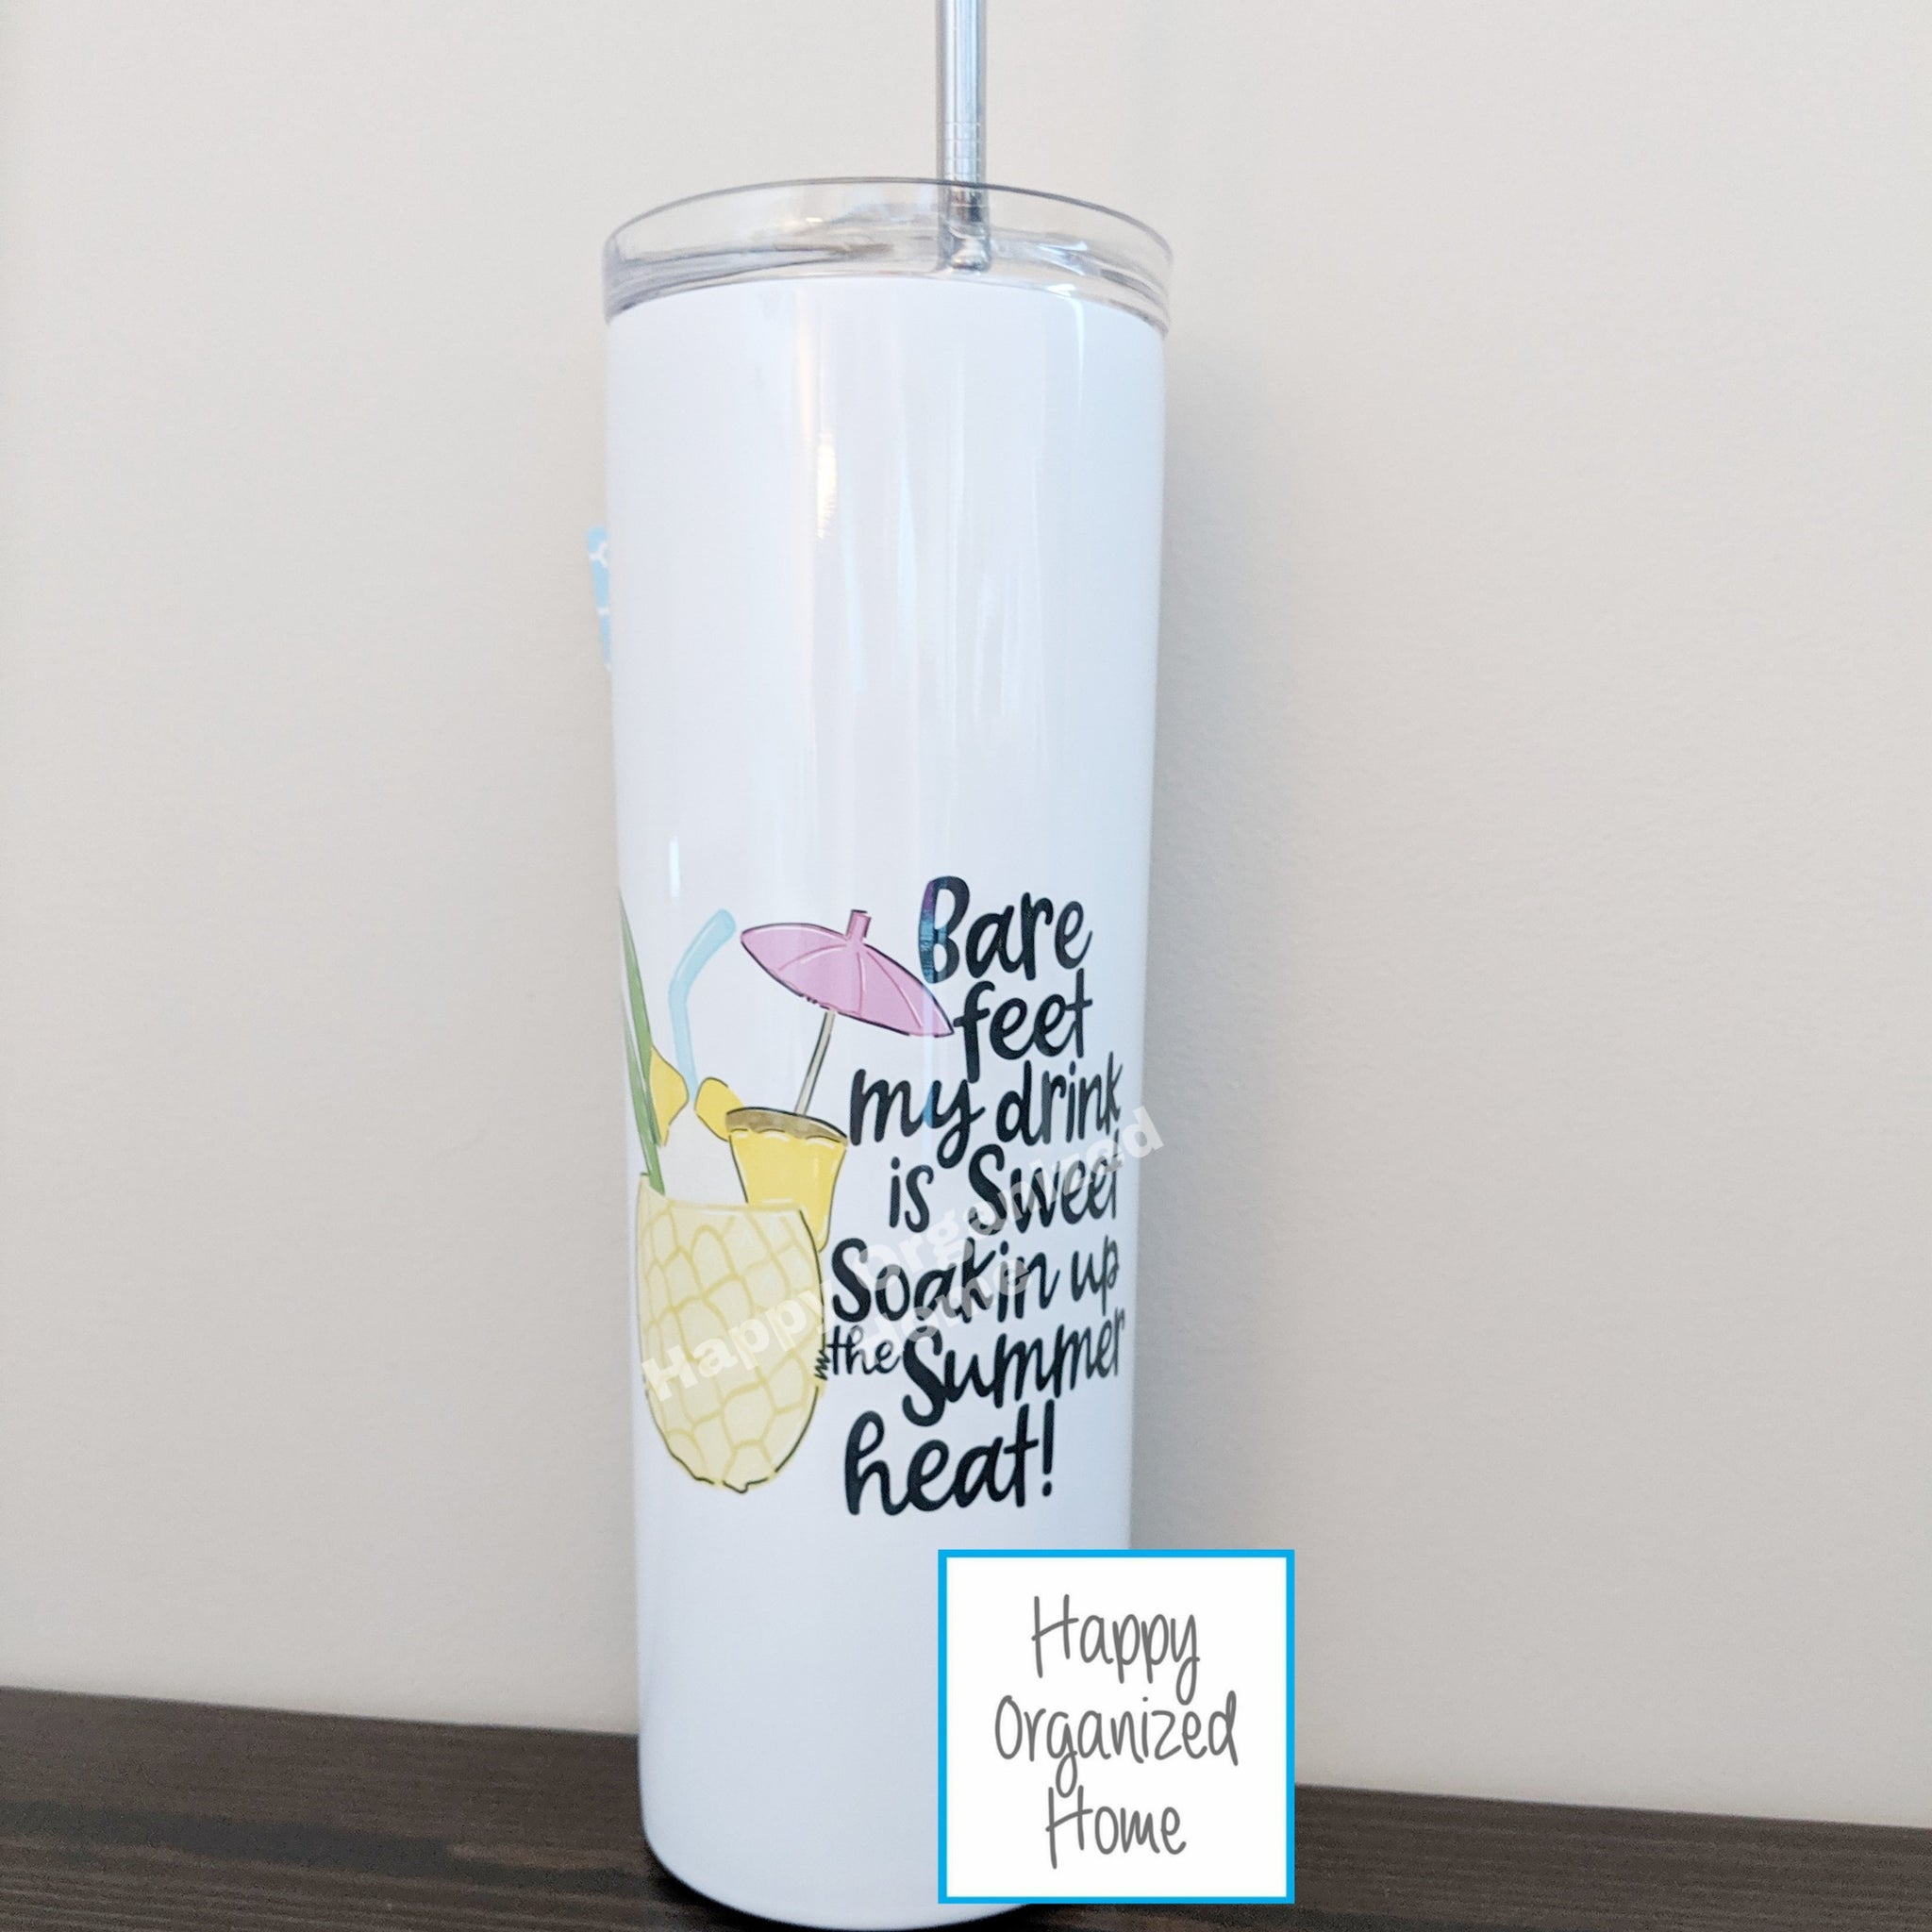 Bare feet, my drink is sweet, Soakin up the summer heat - Insulated tumbler with metal straw